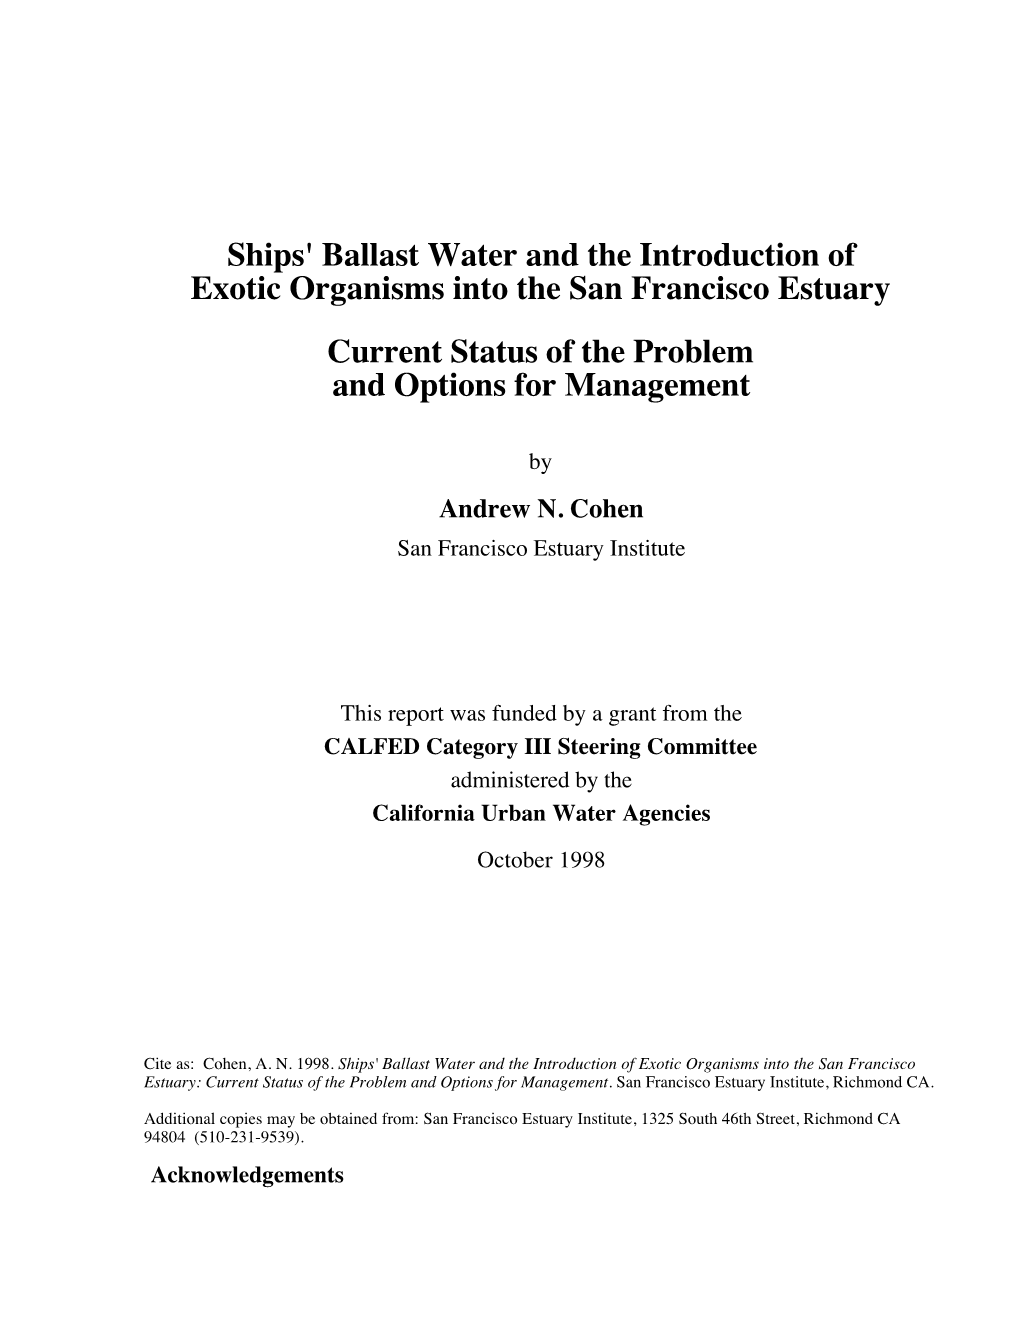 Ships' Ballast Water and the Introduction of Exotic Organisms Into the San Francisco Estuary Current Status of the Problem and Options for Management